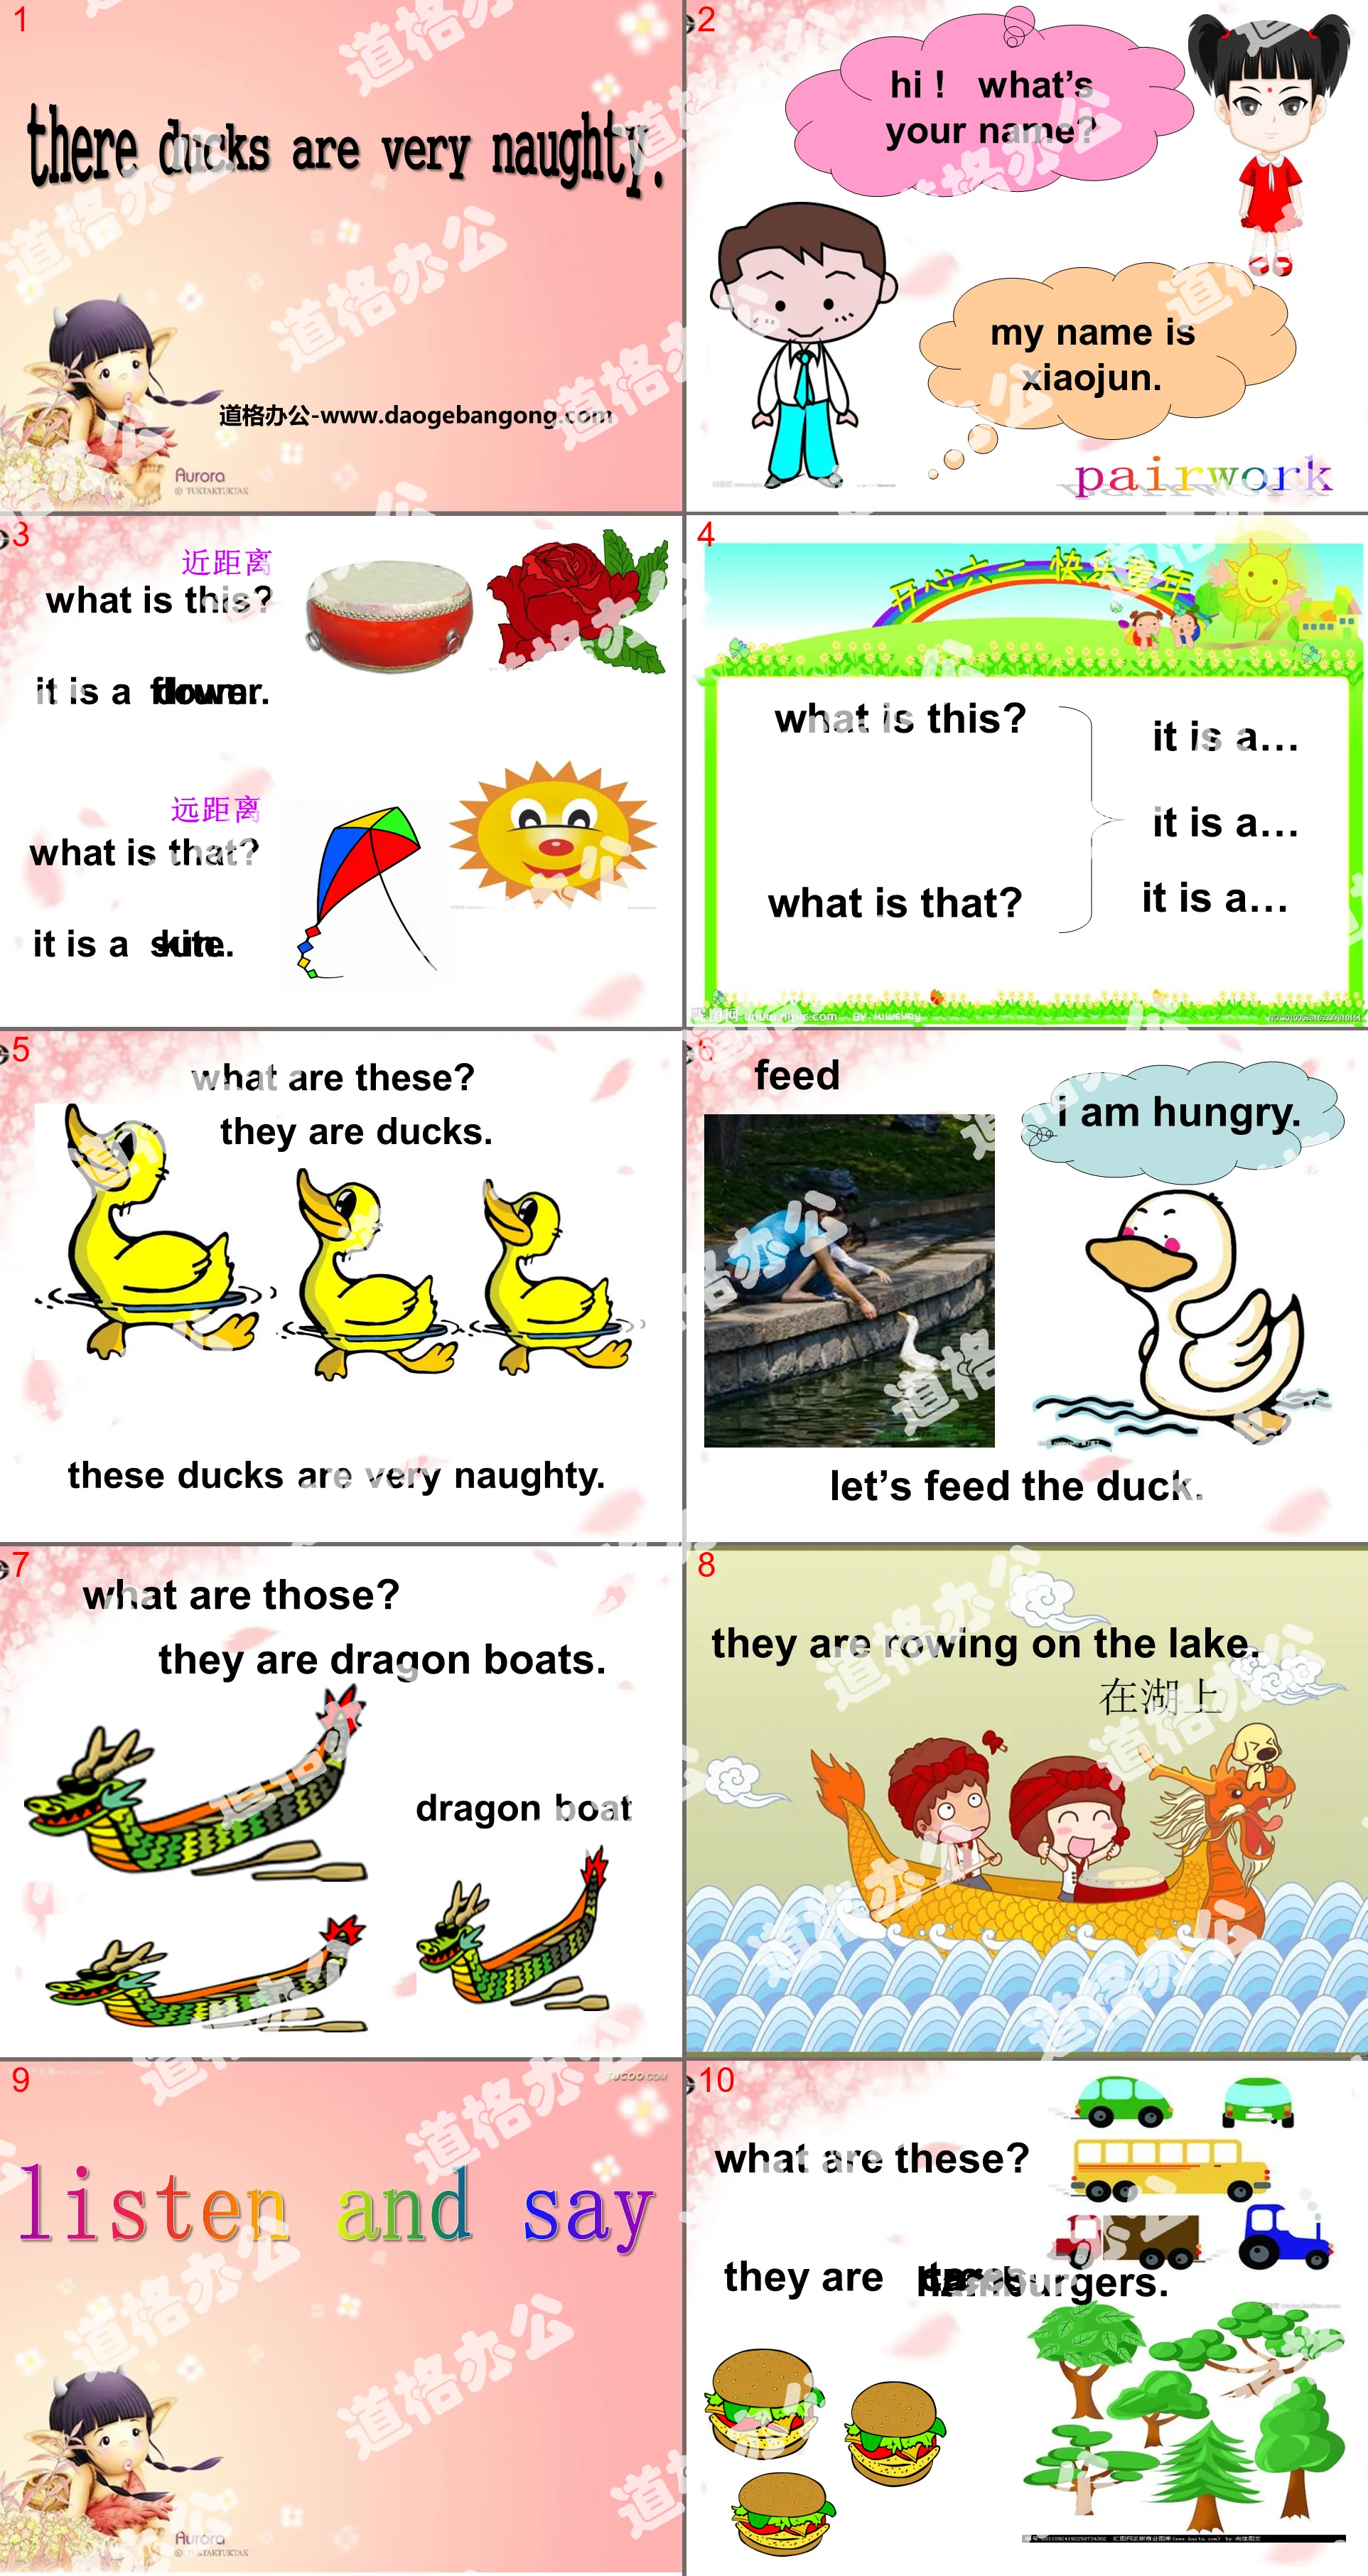 "These ducks are very naughty!" PPT courseware 4